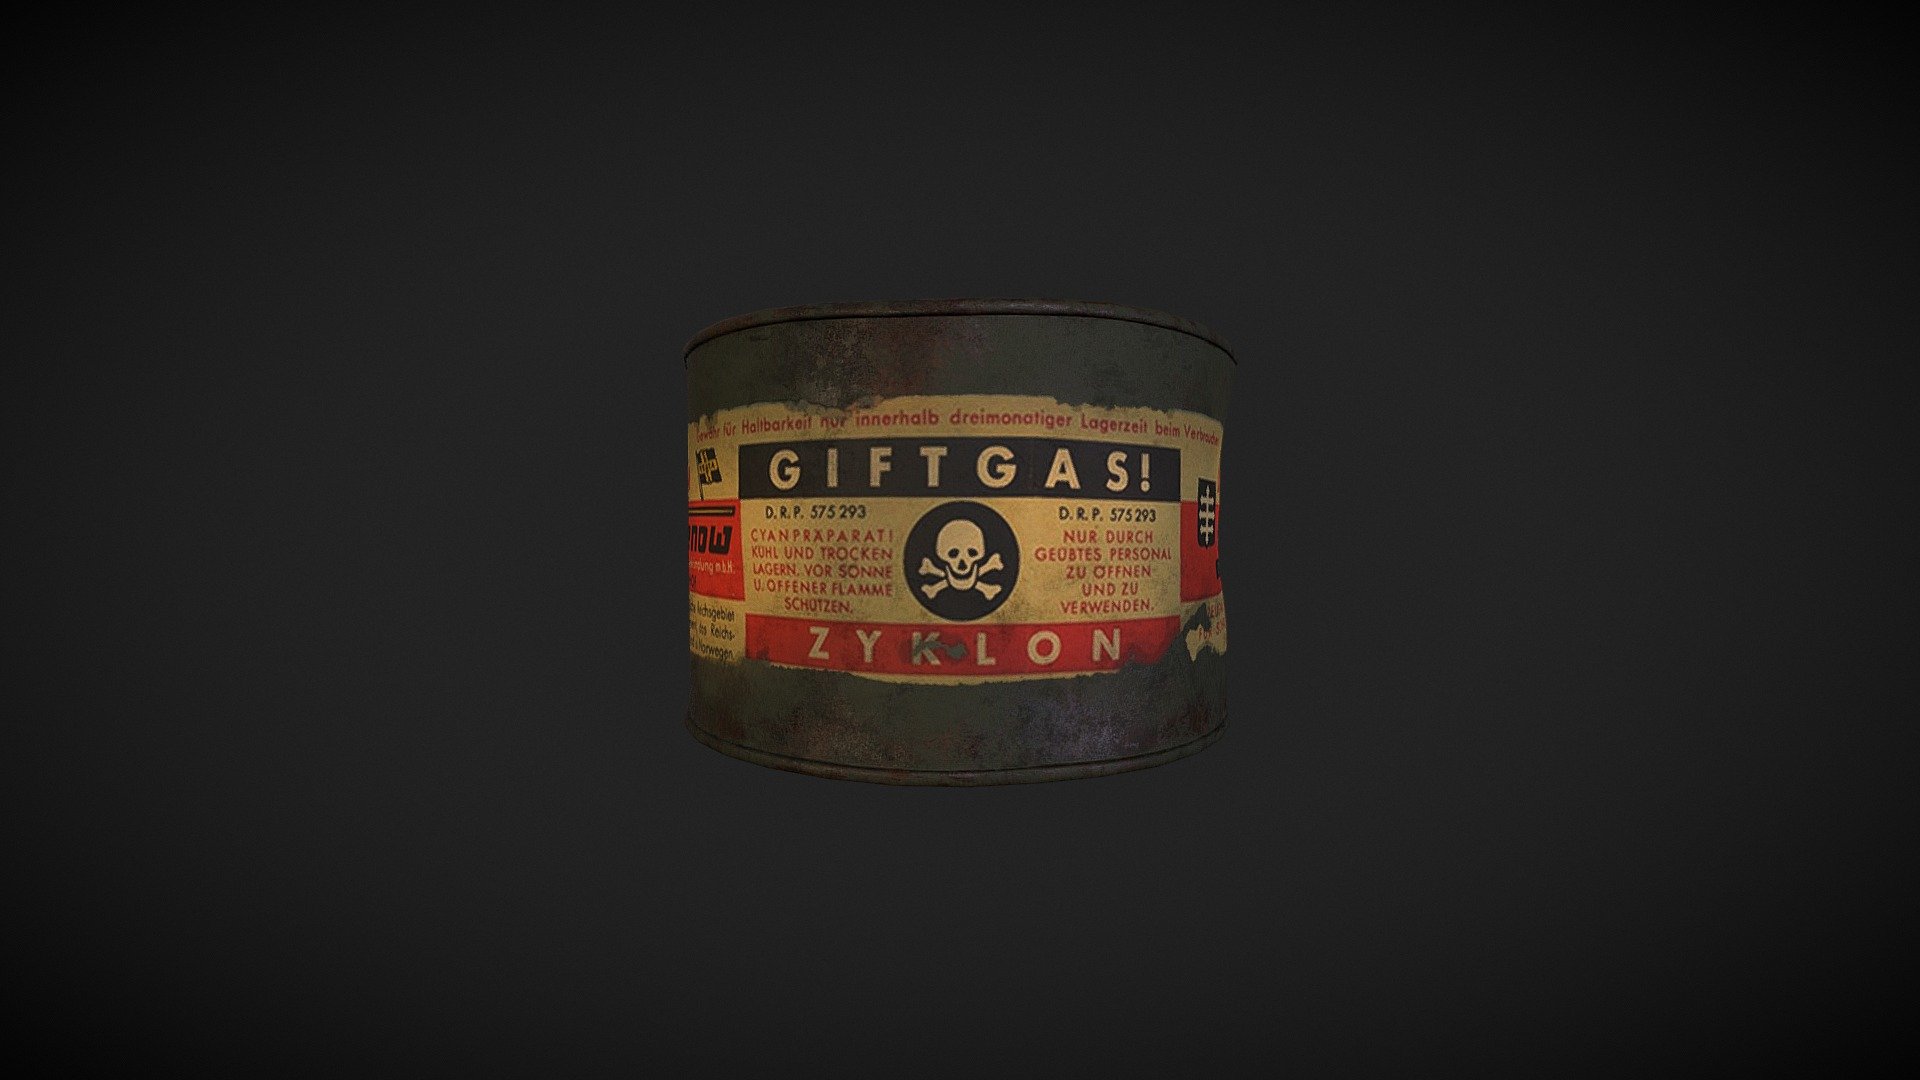 A 3D reproduction of German gas can (Zyklon B) used with barbarism for the extermination of prisioner in concentration camps during WW2, Modeled with Blender and textured using Substance Painter - WW2 - Zyklon B German Gas Can - 3D model by zdani98 3d model